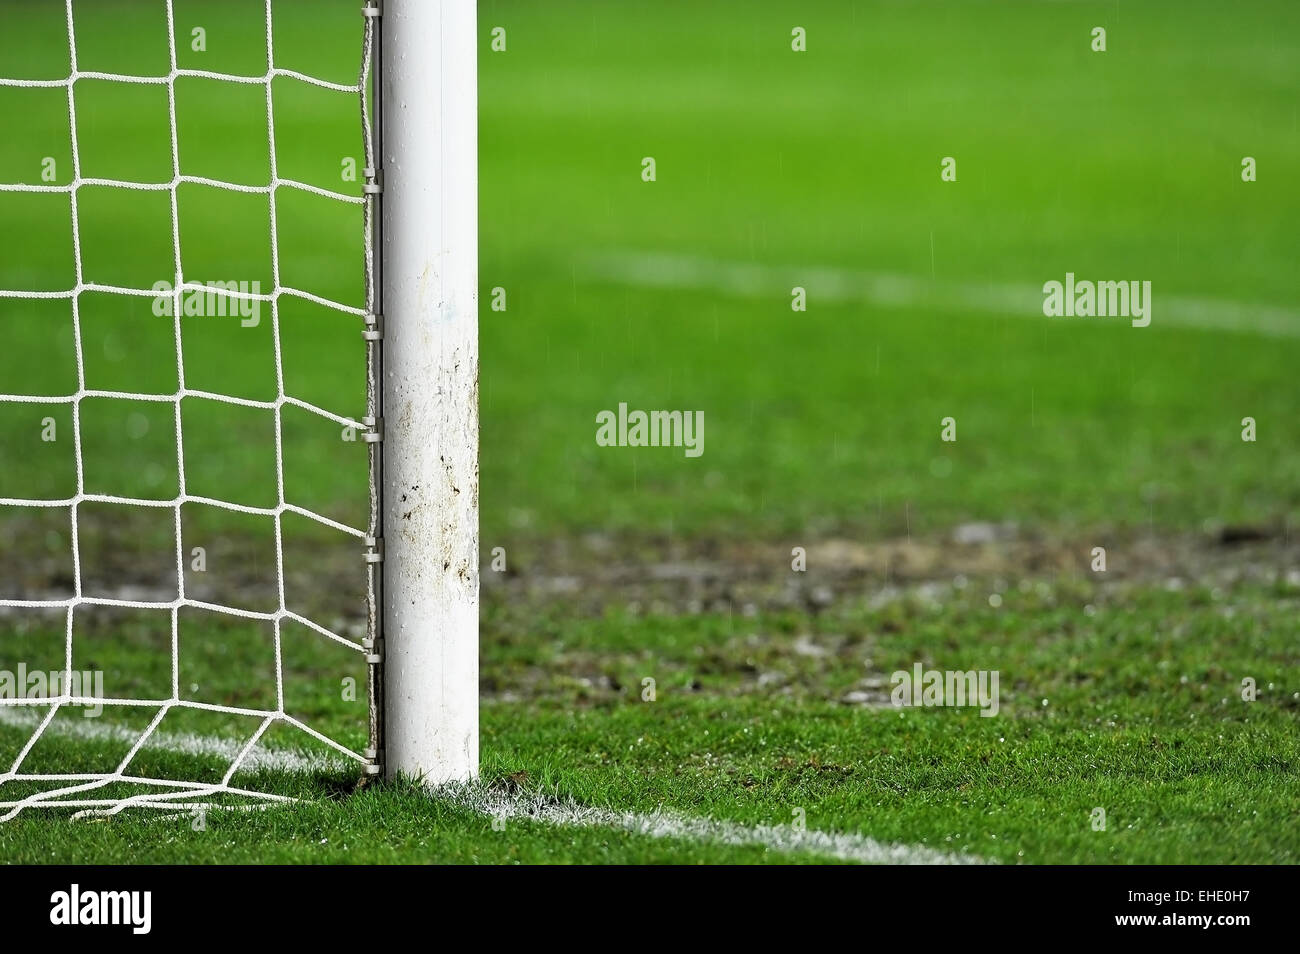 Sports shot with a soccer goal detail on rainy day Stock Photo